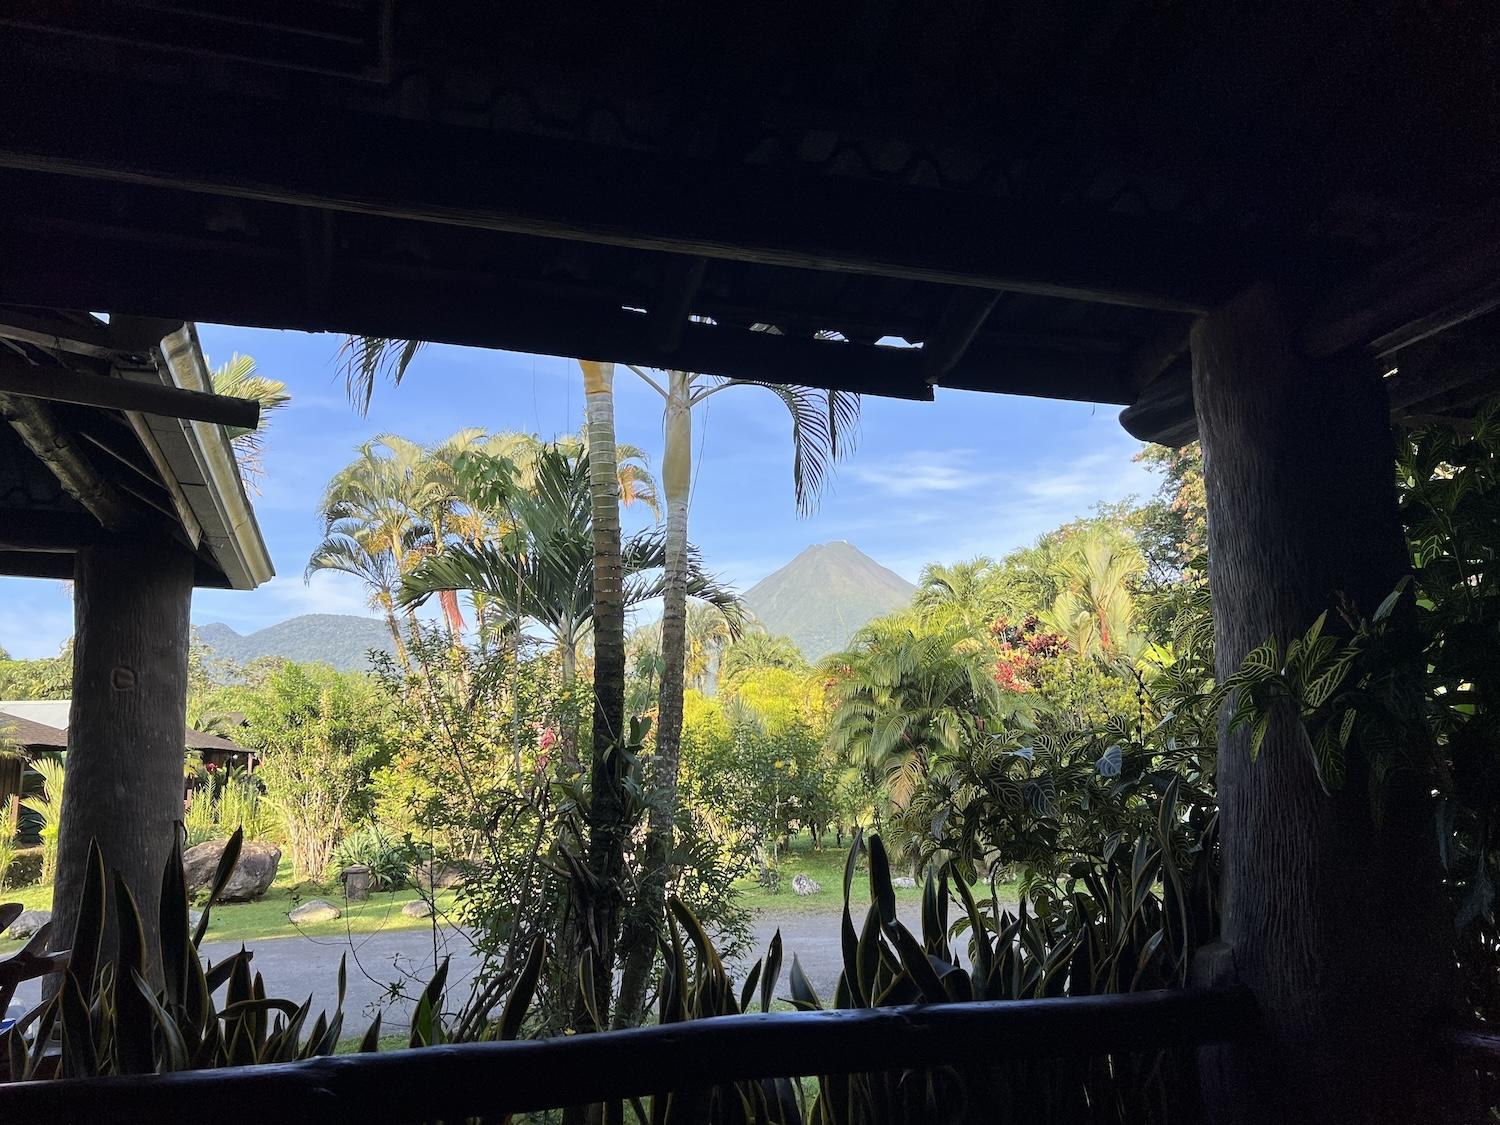 The Arenal Volcano looms over La Fortuna. It's shown here from the Arenal Montechiari Hotel.